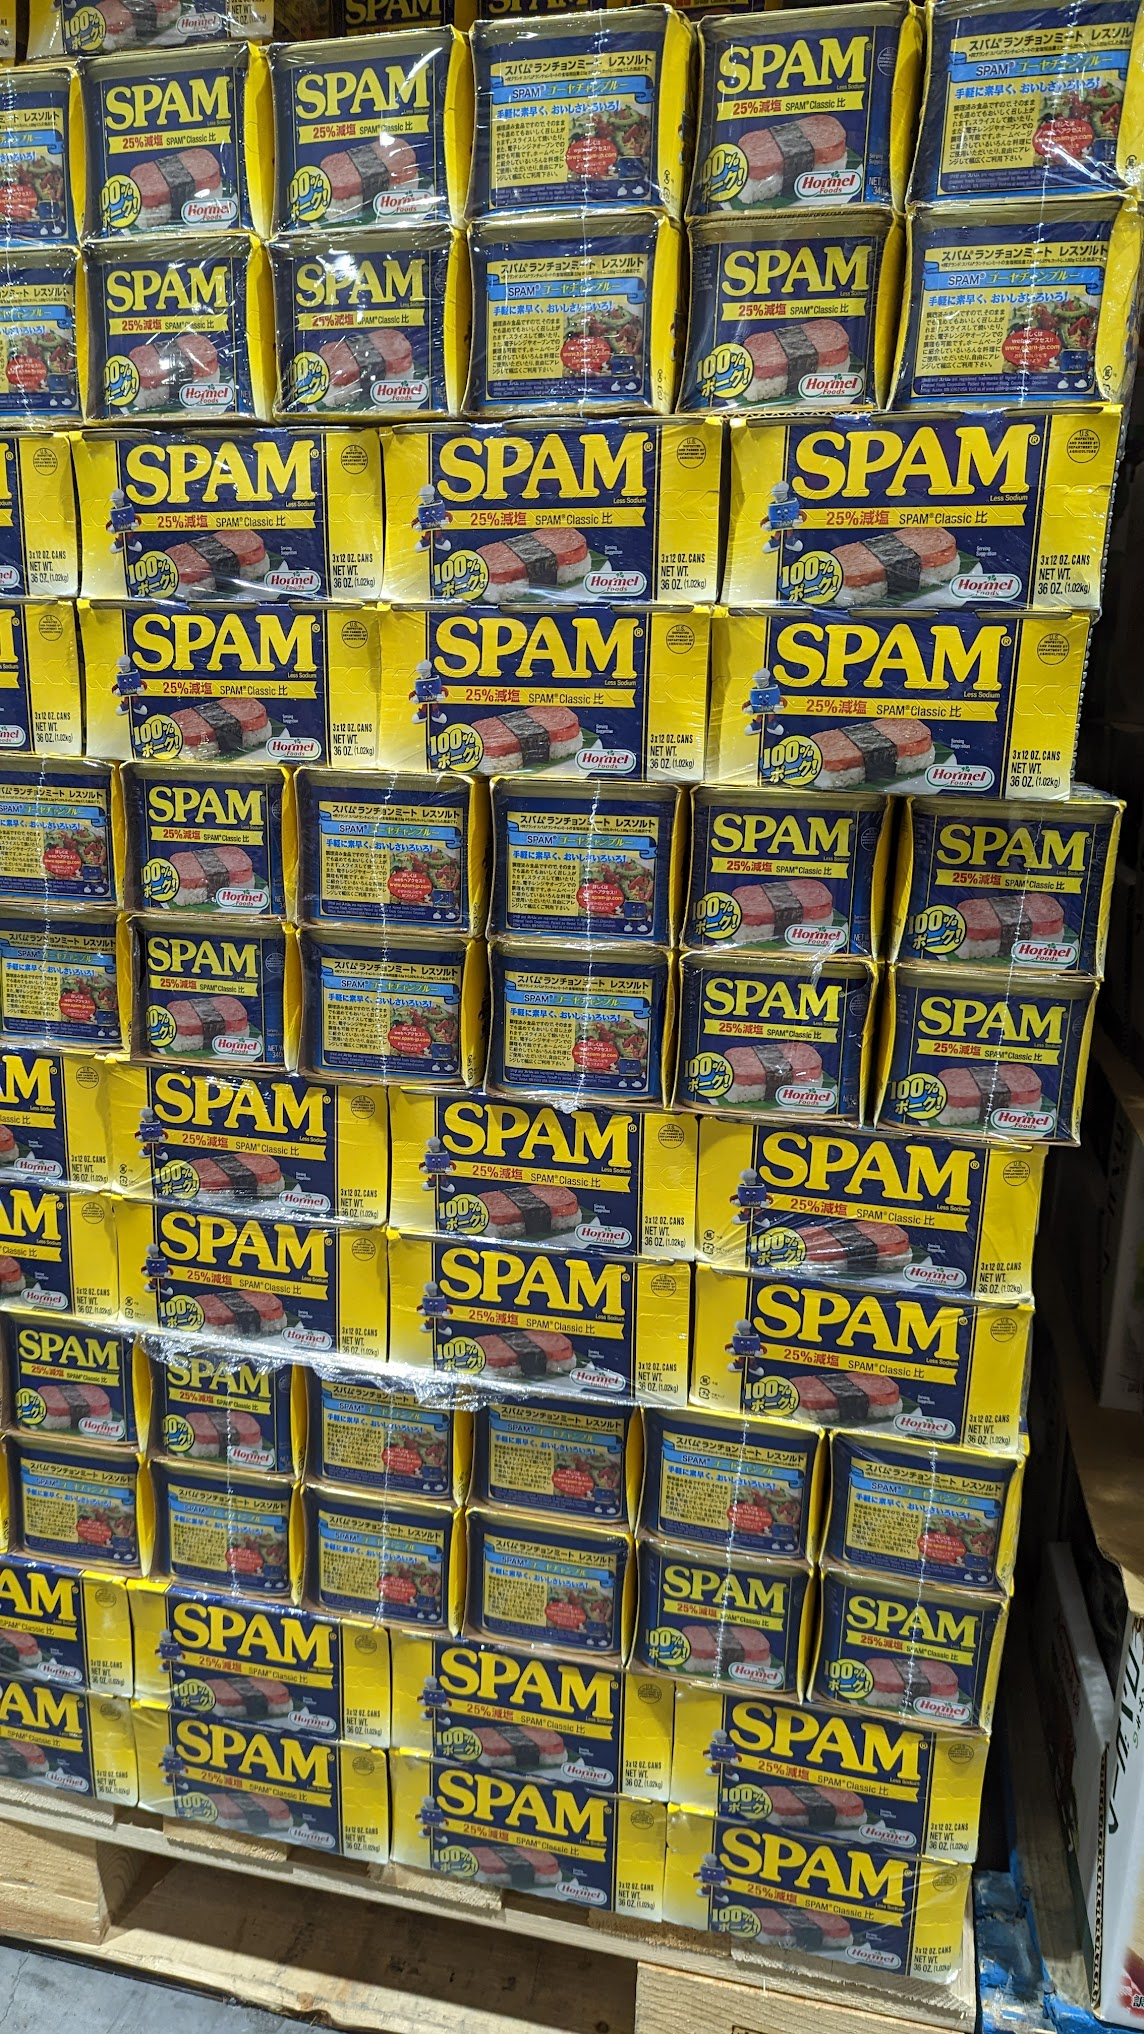 Spam cans in Costco Tamasakai